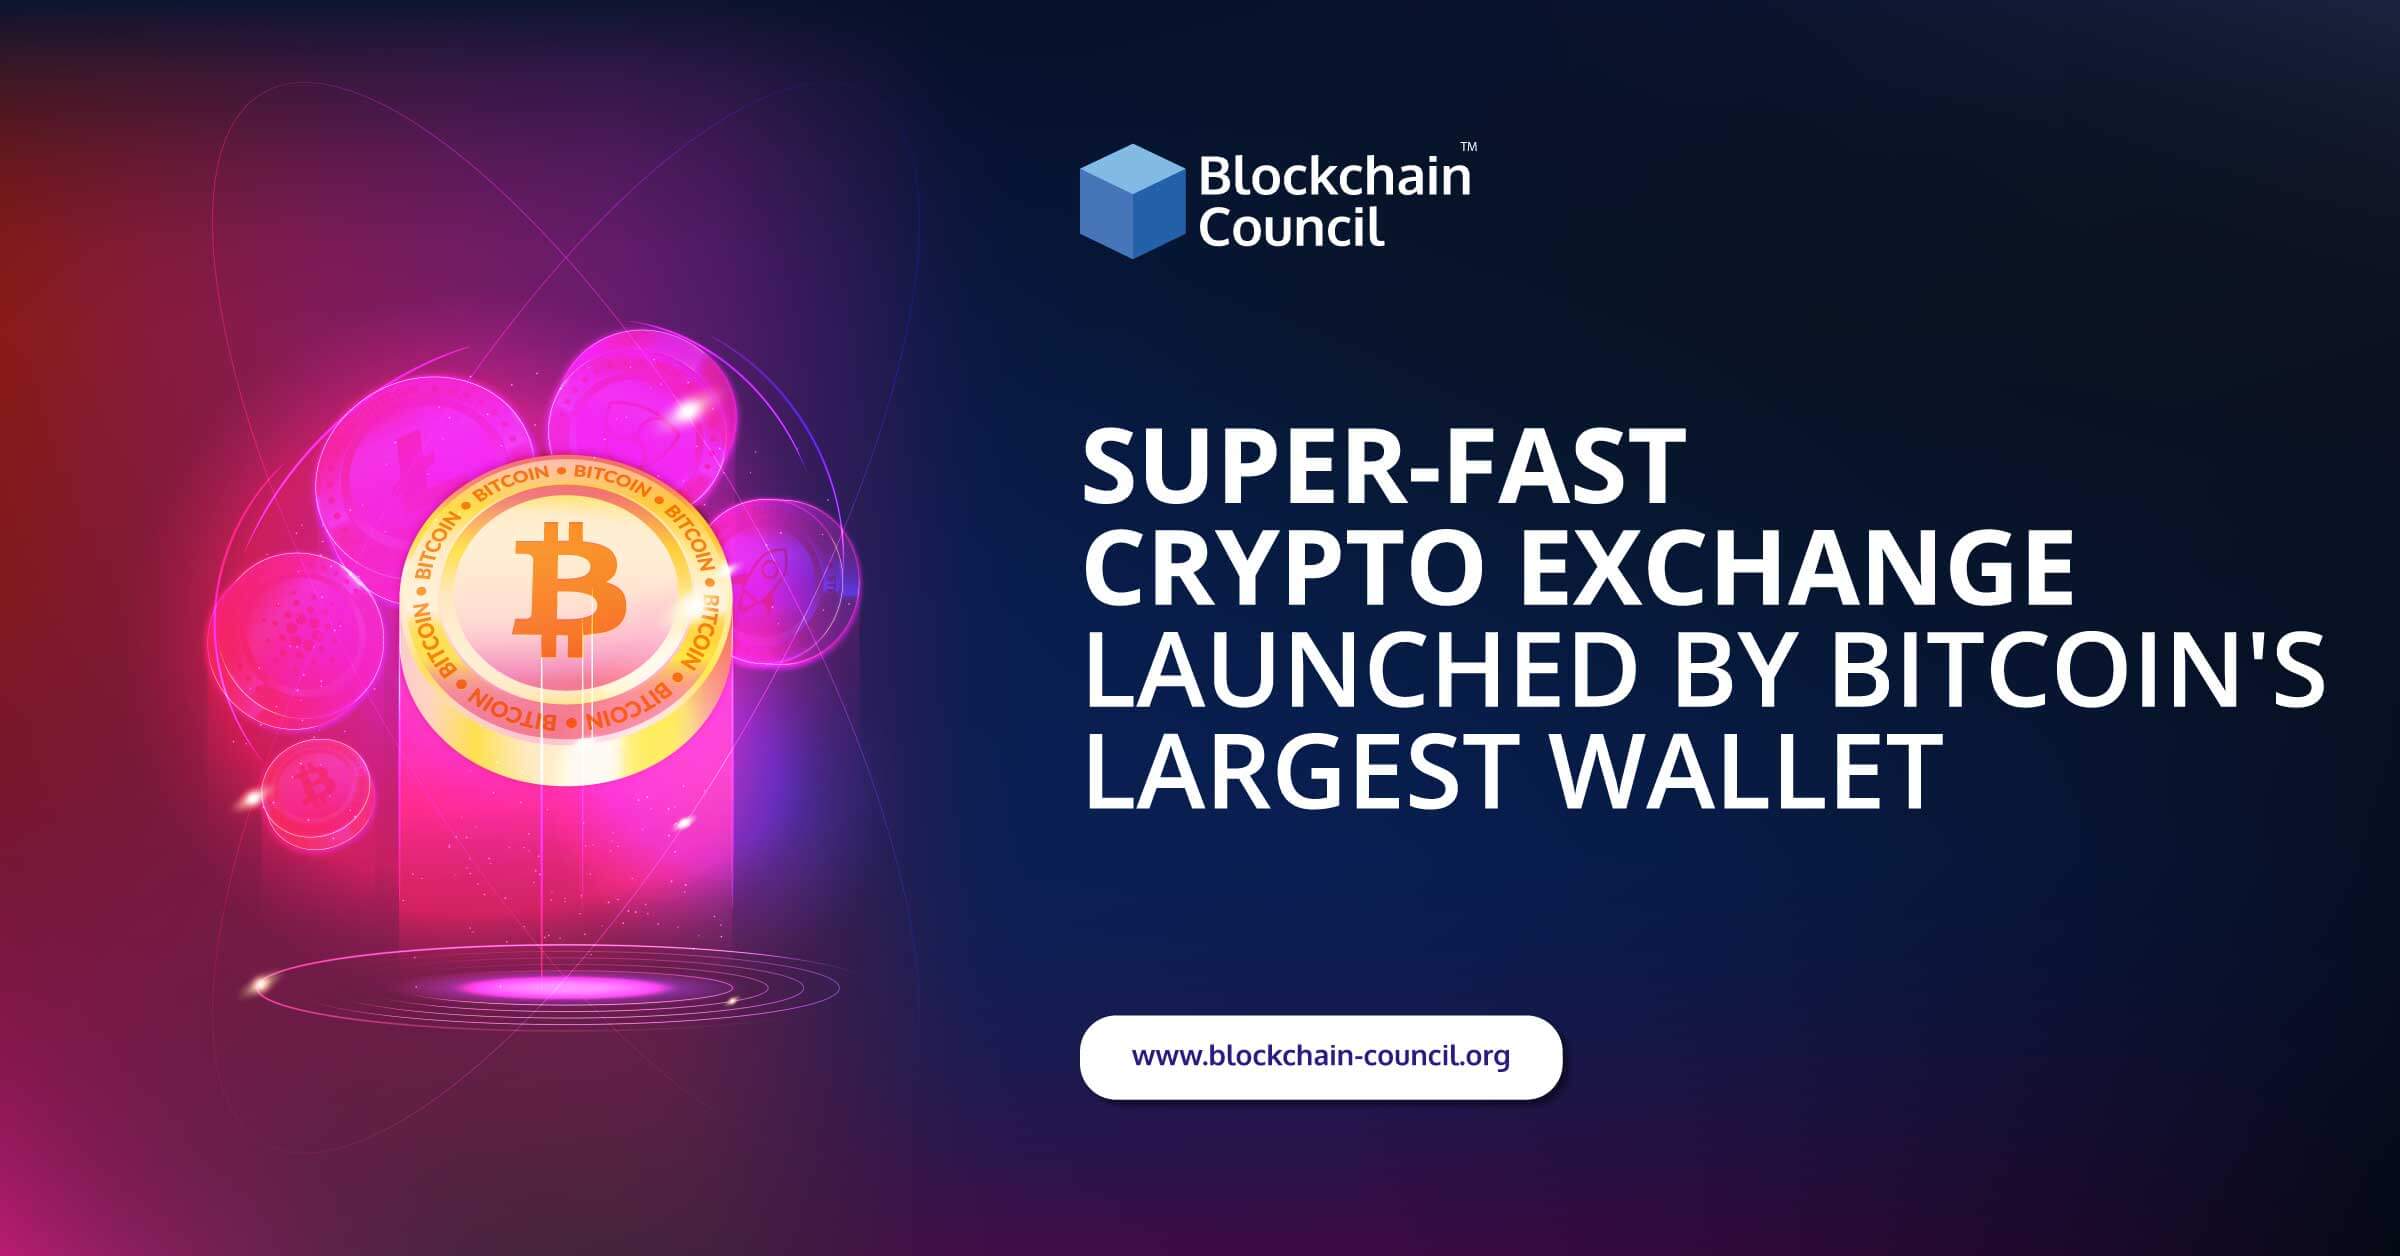 Super-fast Crypto Exchange Launched by Bitcoin’s Largest Wallet